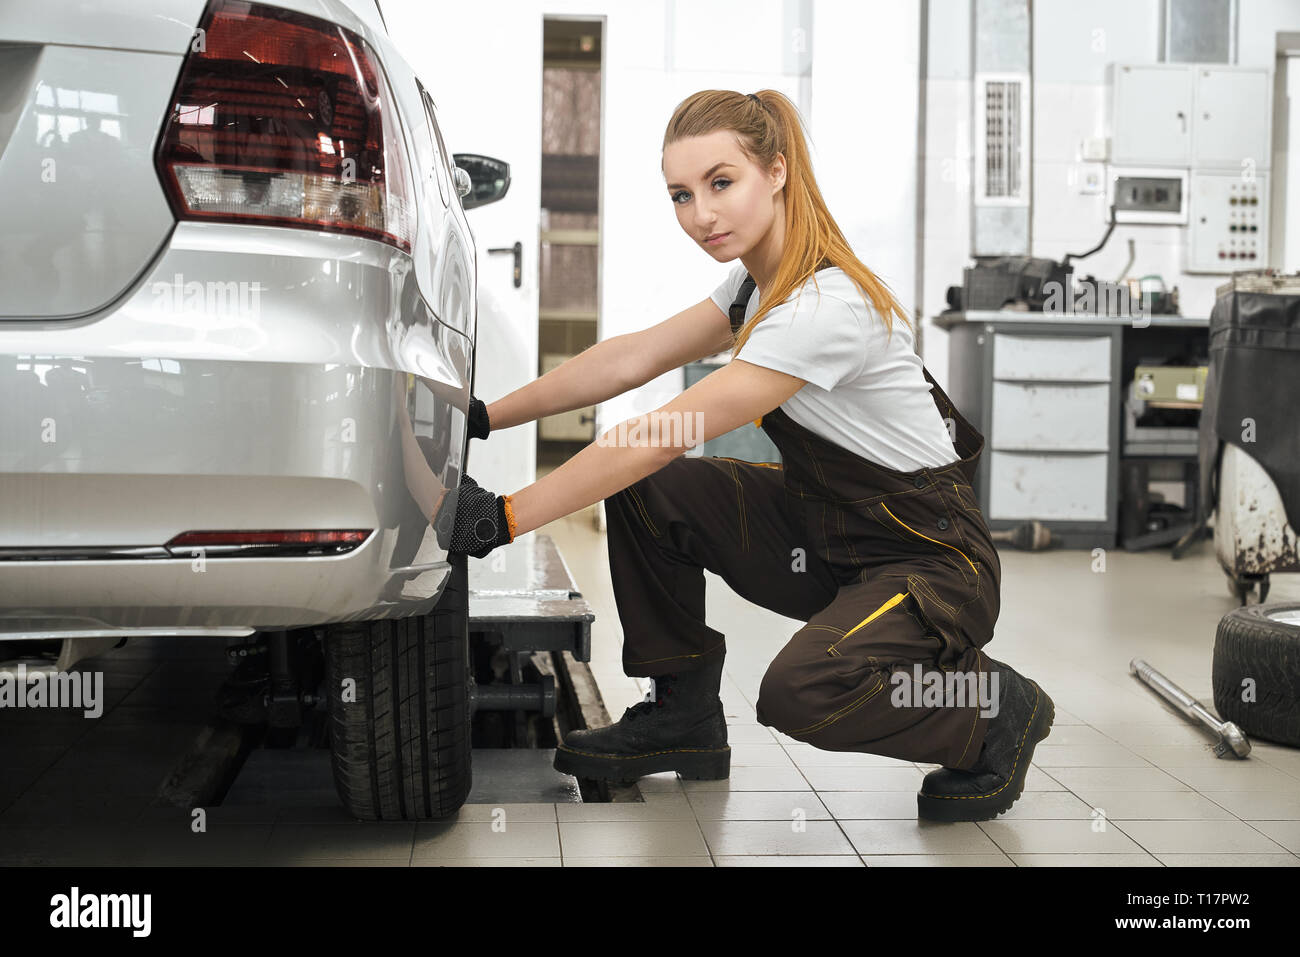 Beautiful girl fixing wheel, tyre of silver automobile. Confident young woman wearing in white t shirt and coveralls, looking at camera, posing. Girl working in service station with vehicles. Stock Photo